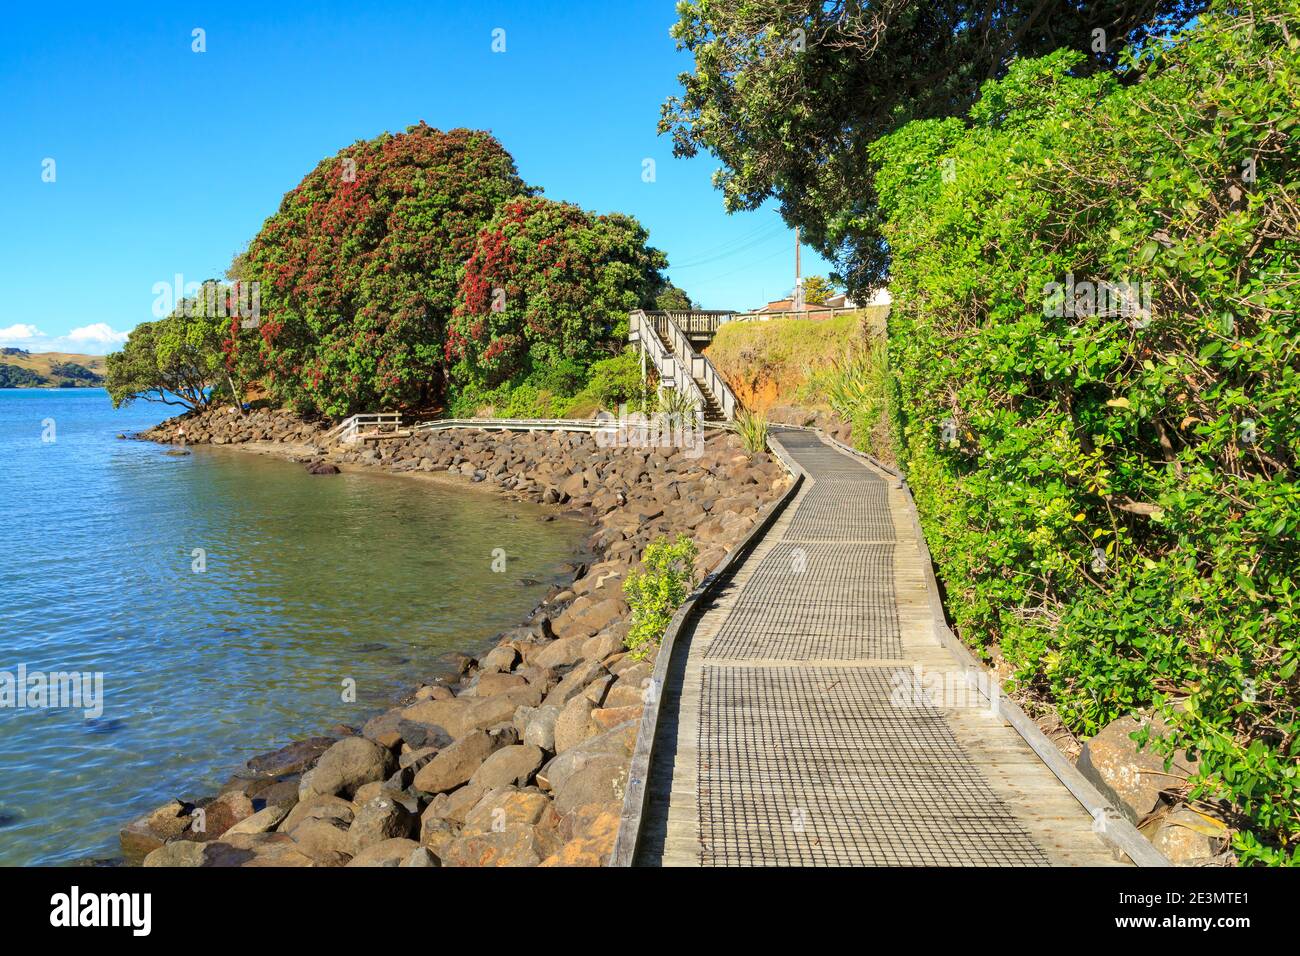 A wooden boardwalk on the edge of the harbor at Raglan, New Zealand. in the background is a pohutukawa tree with red summer blossoms Stock Photo